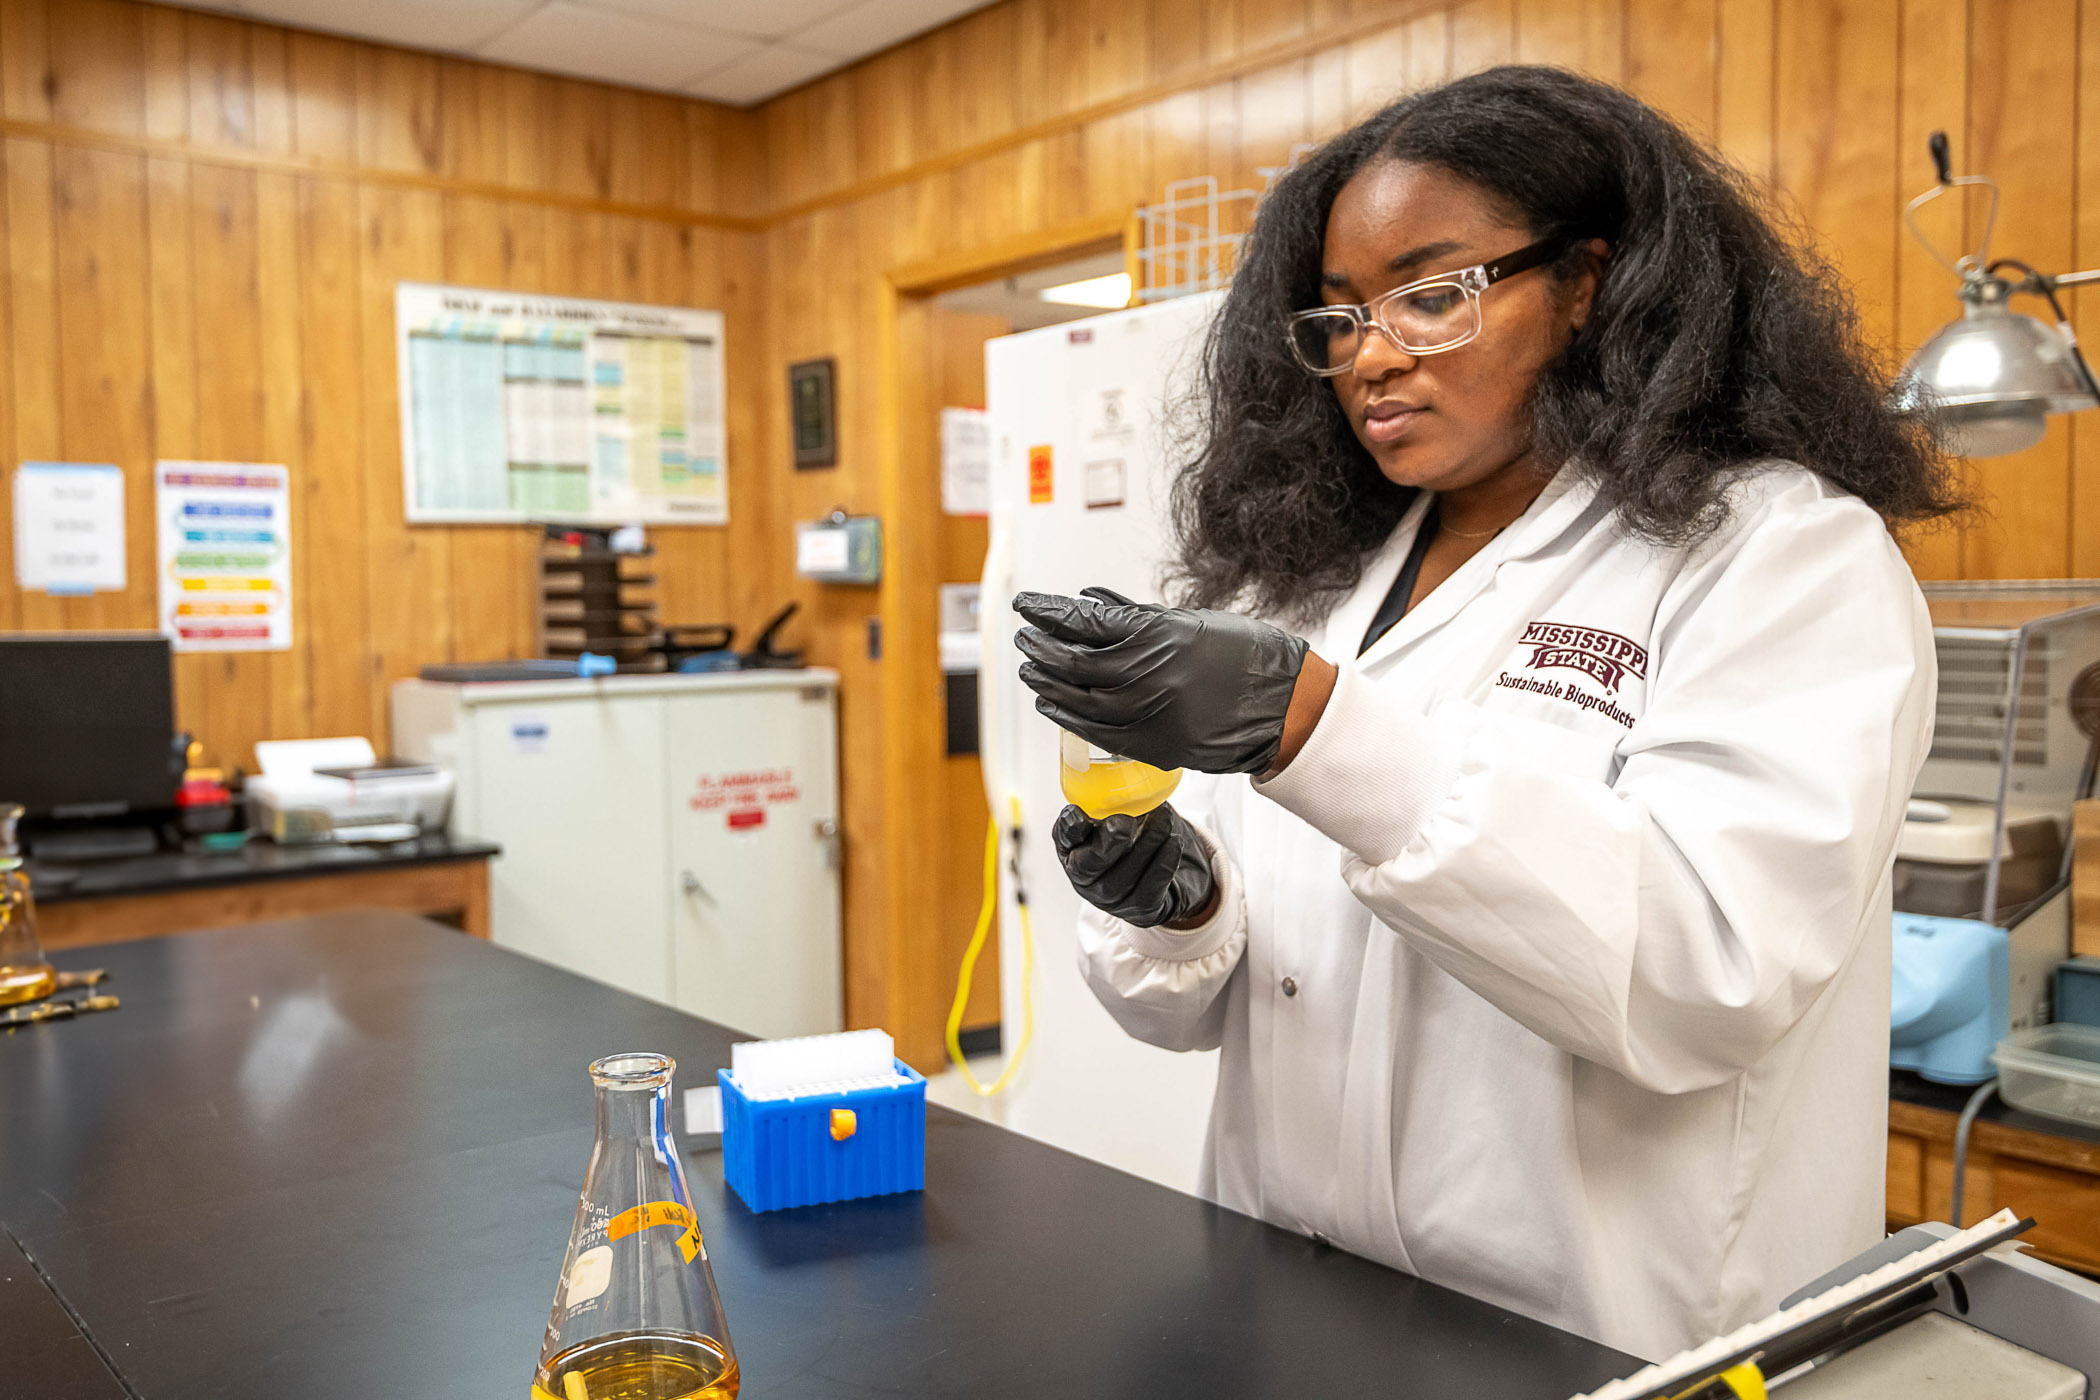 Aleria Story, pictured working in a lab on the MSU campus